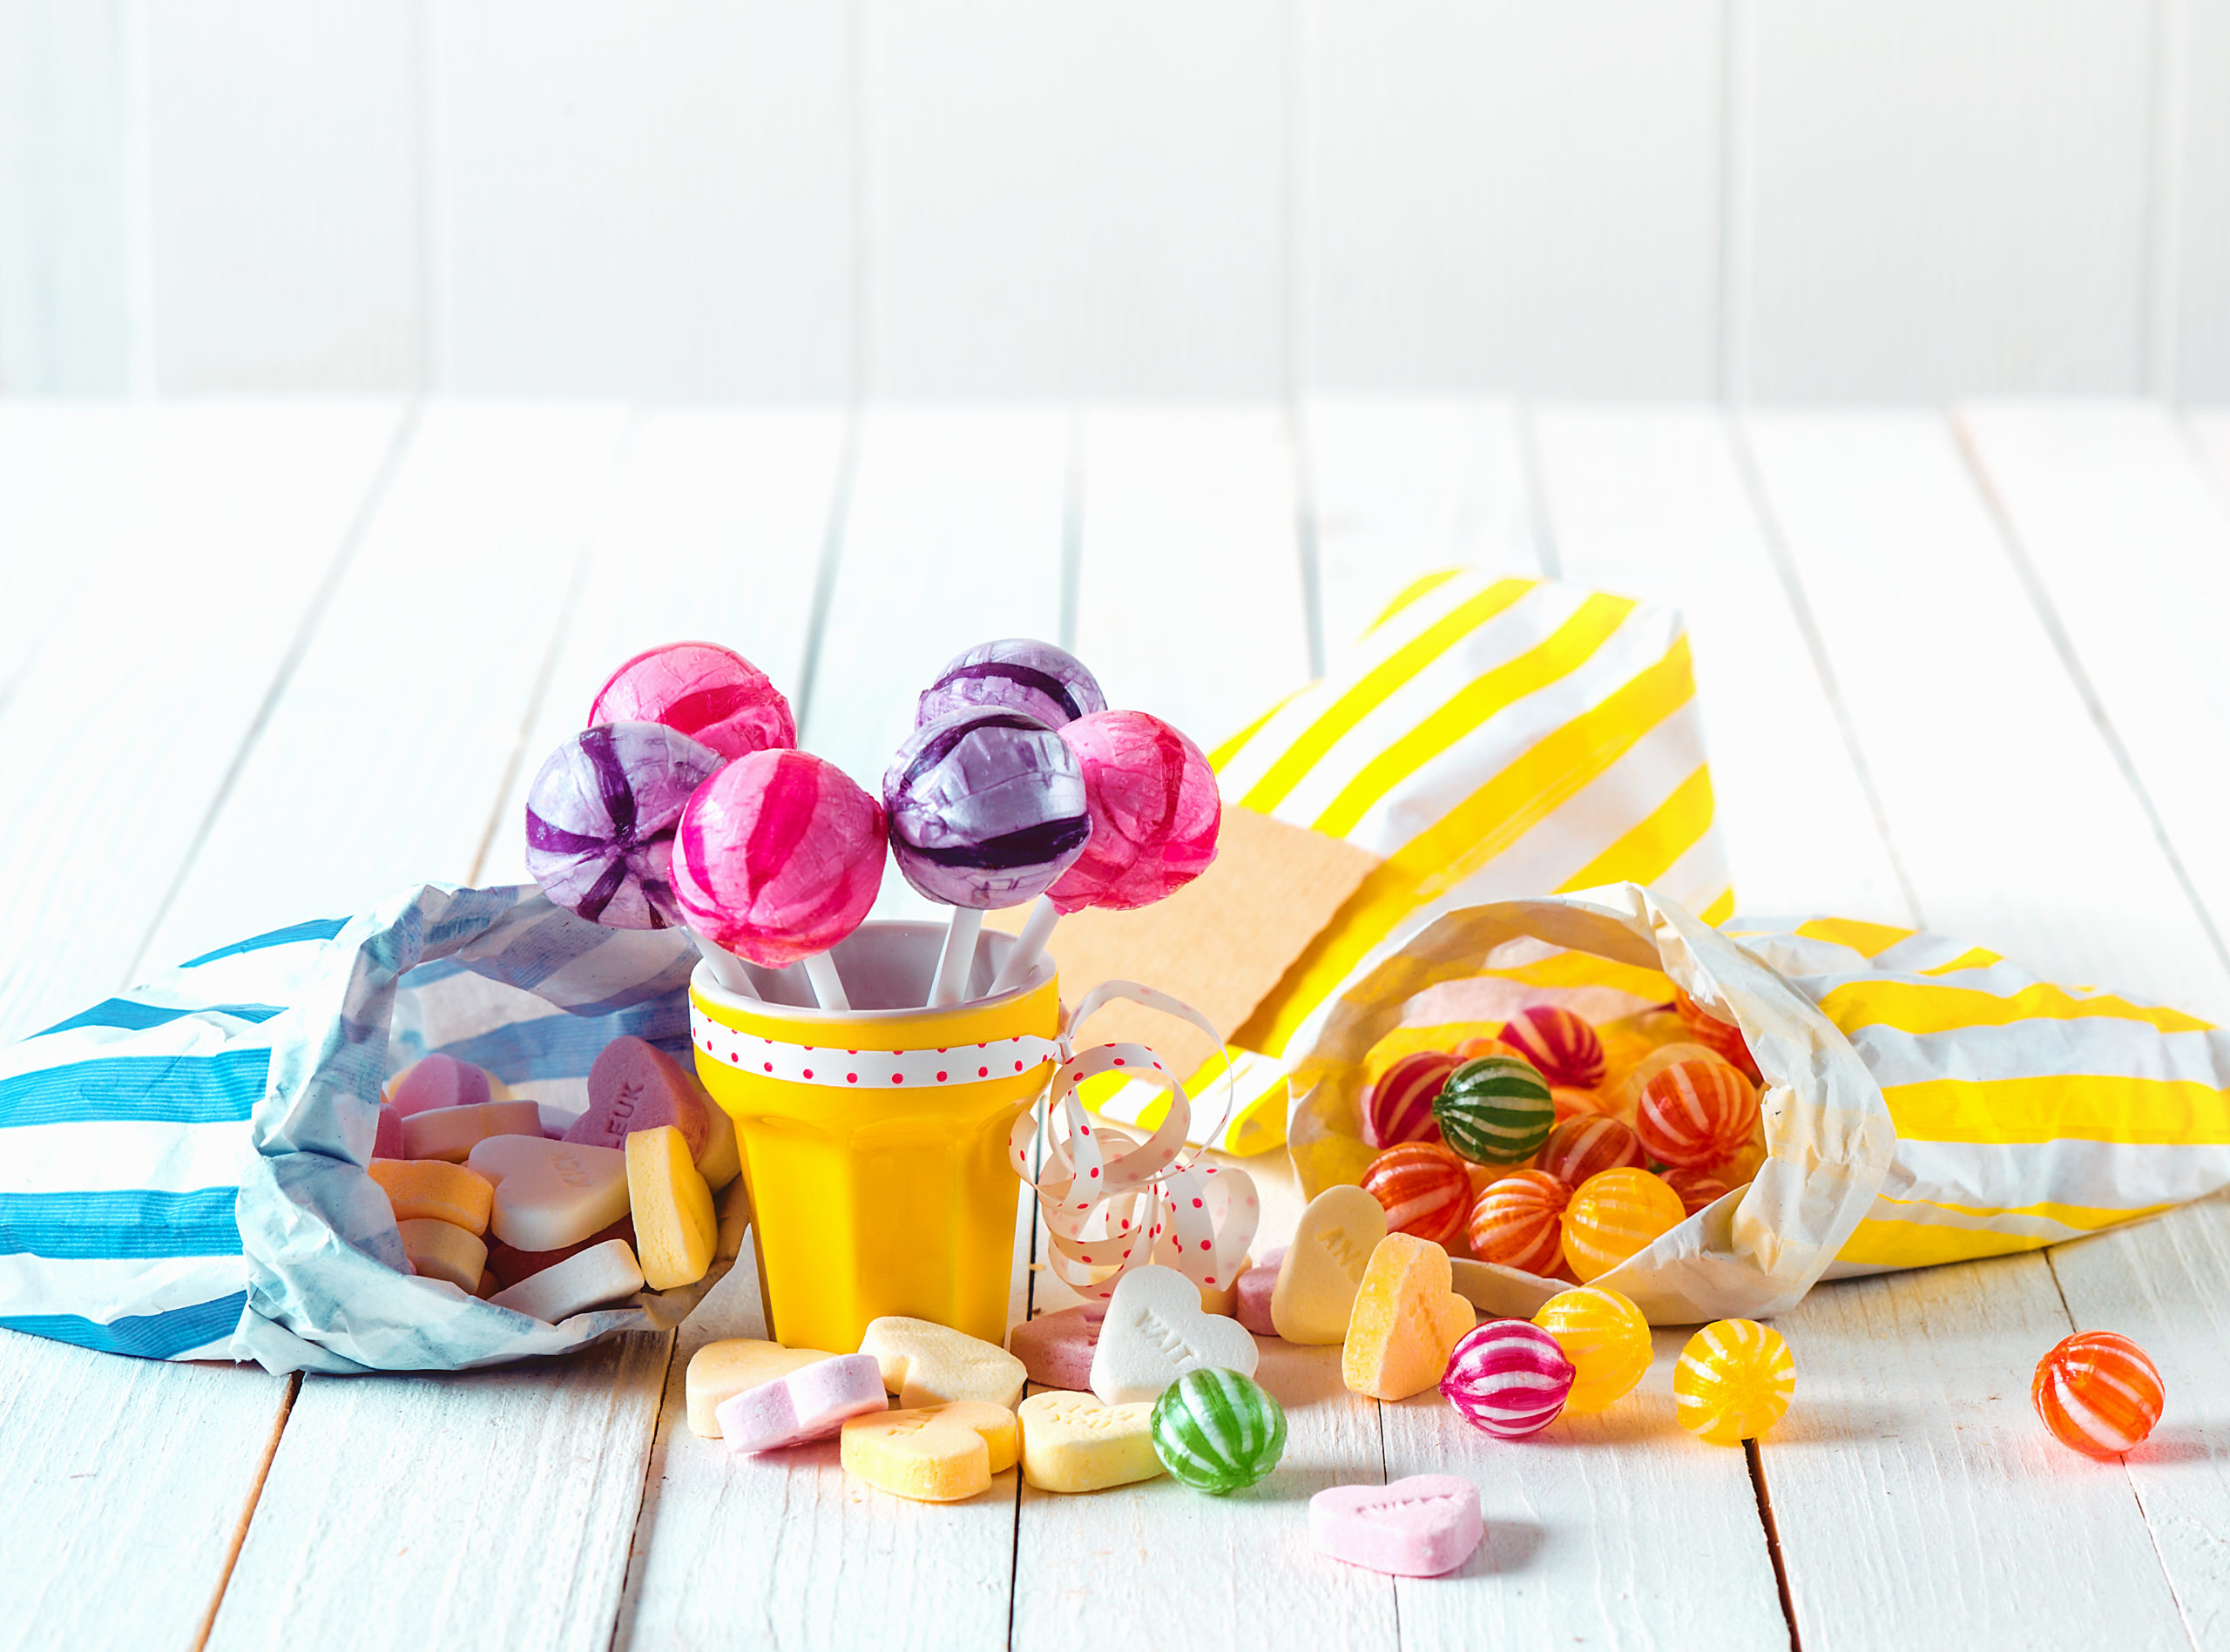 6 Fun Party Favors And Customized Goodie Bags Singapore - Little Steps